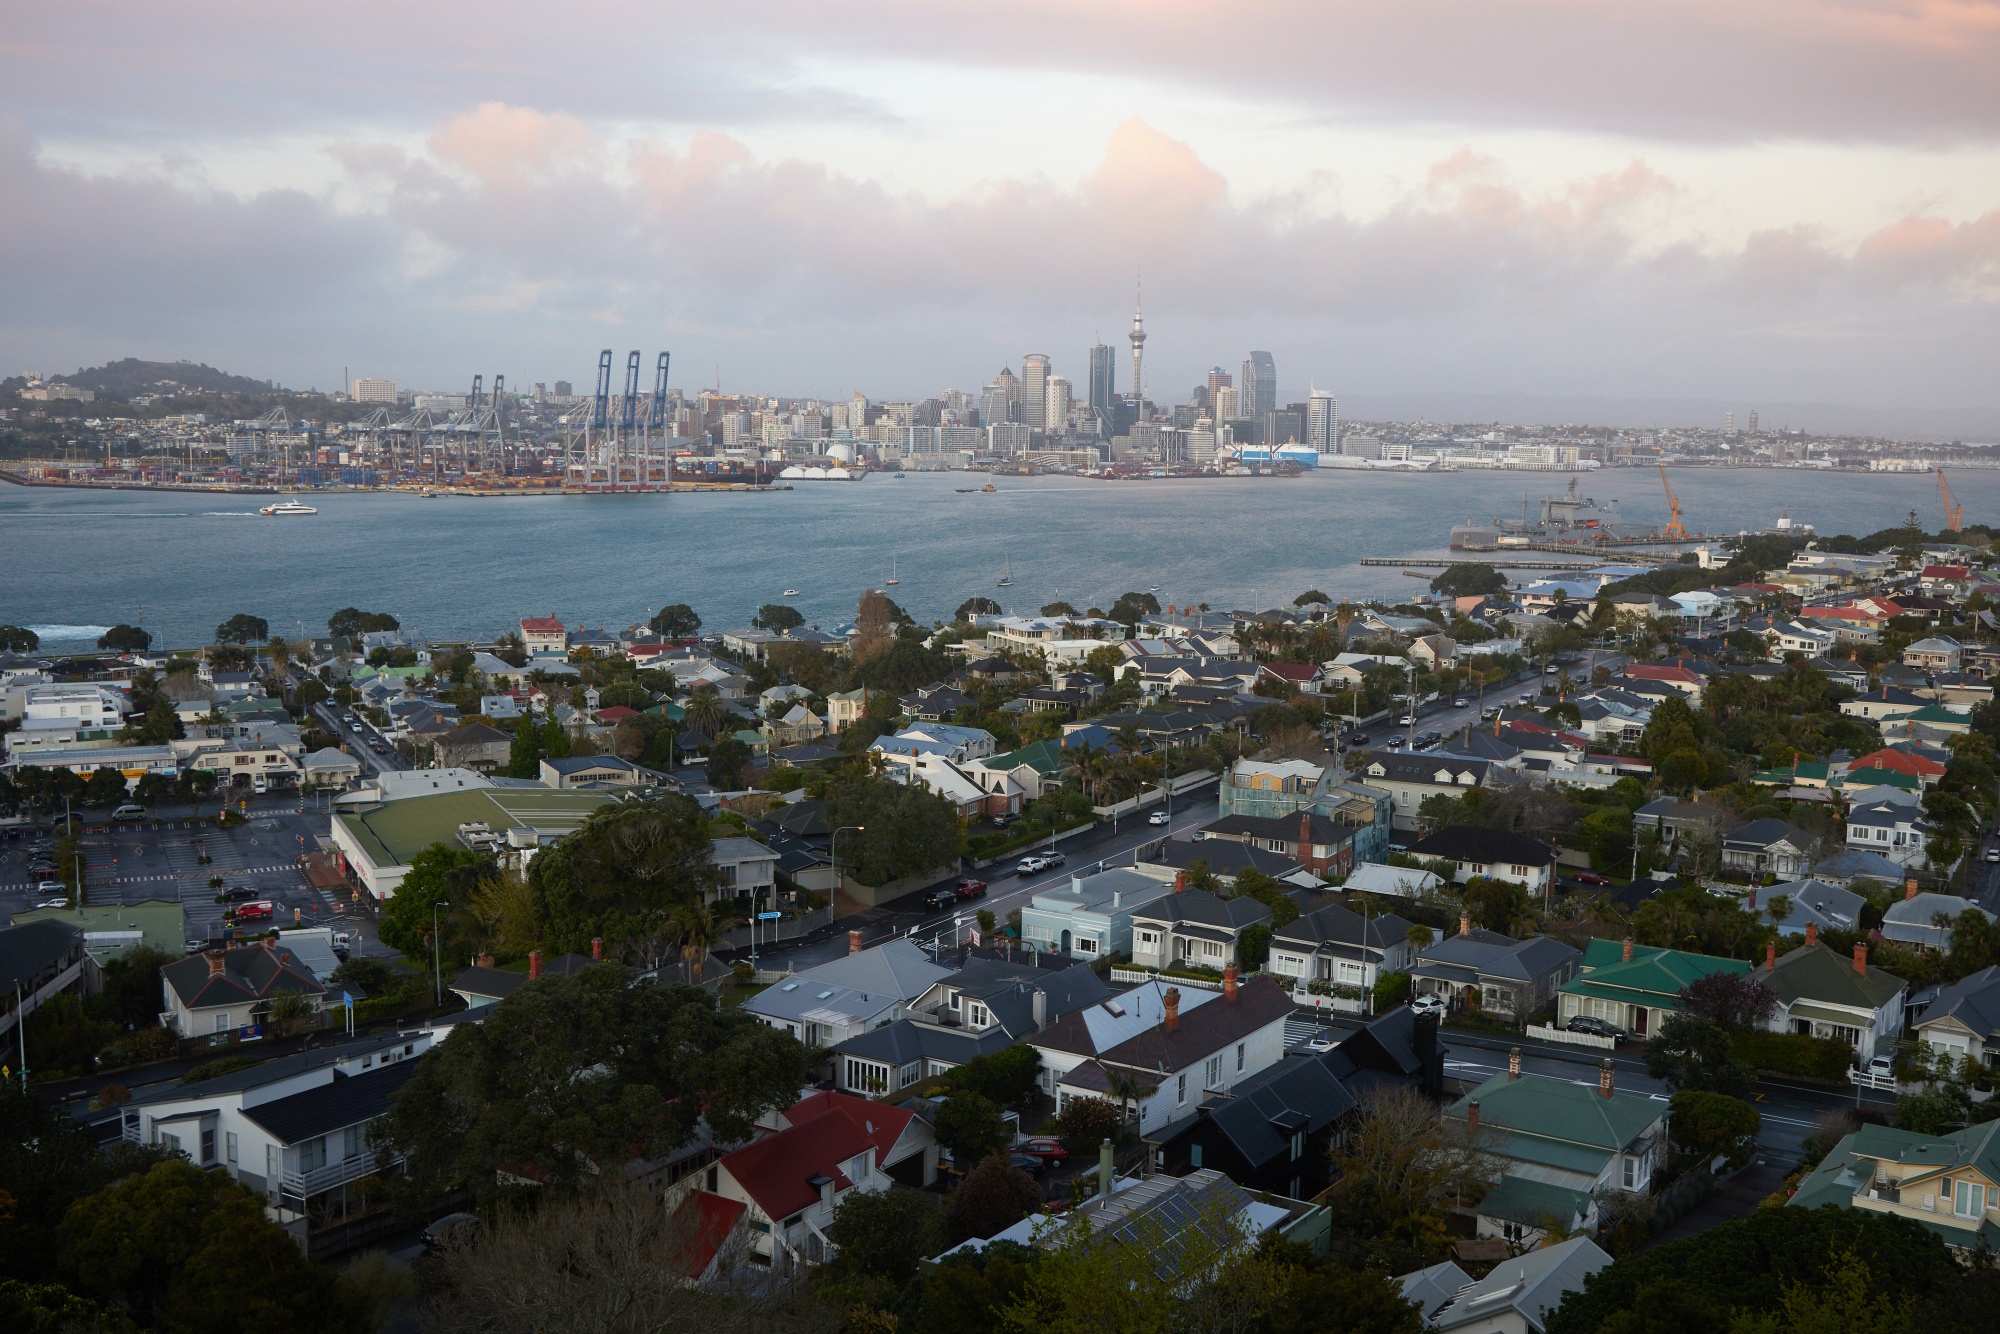 Auckland is the most liveable city in the world, according to the Economist Intelligence Unit’s latest Liveability index.